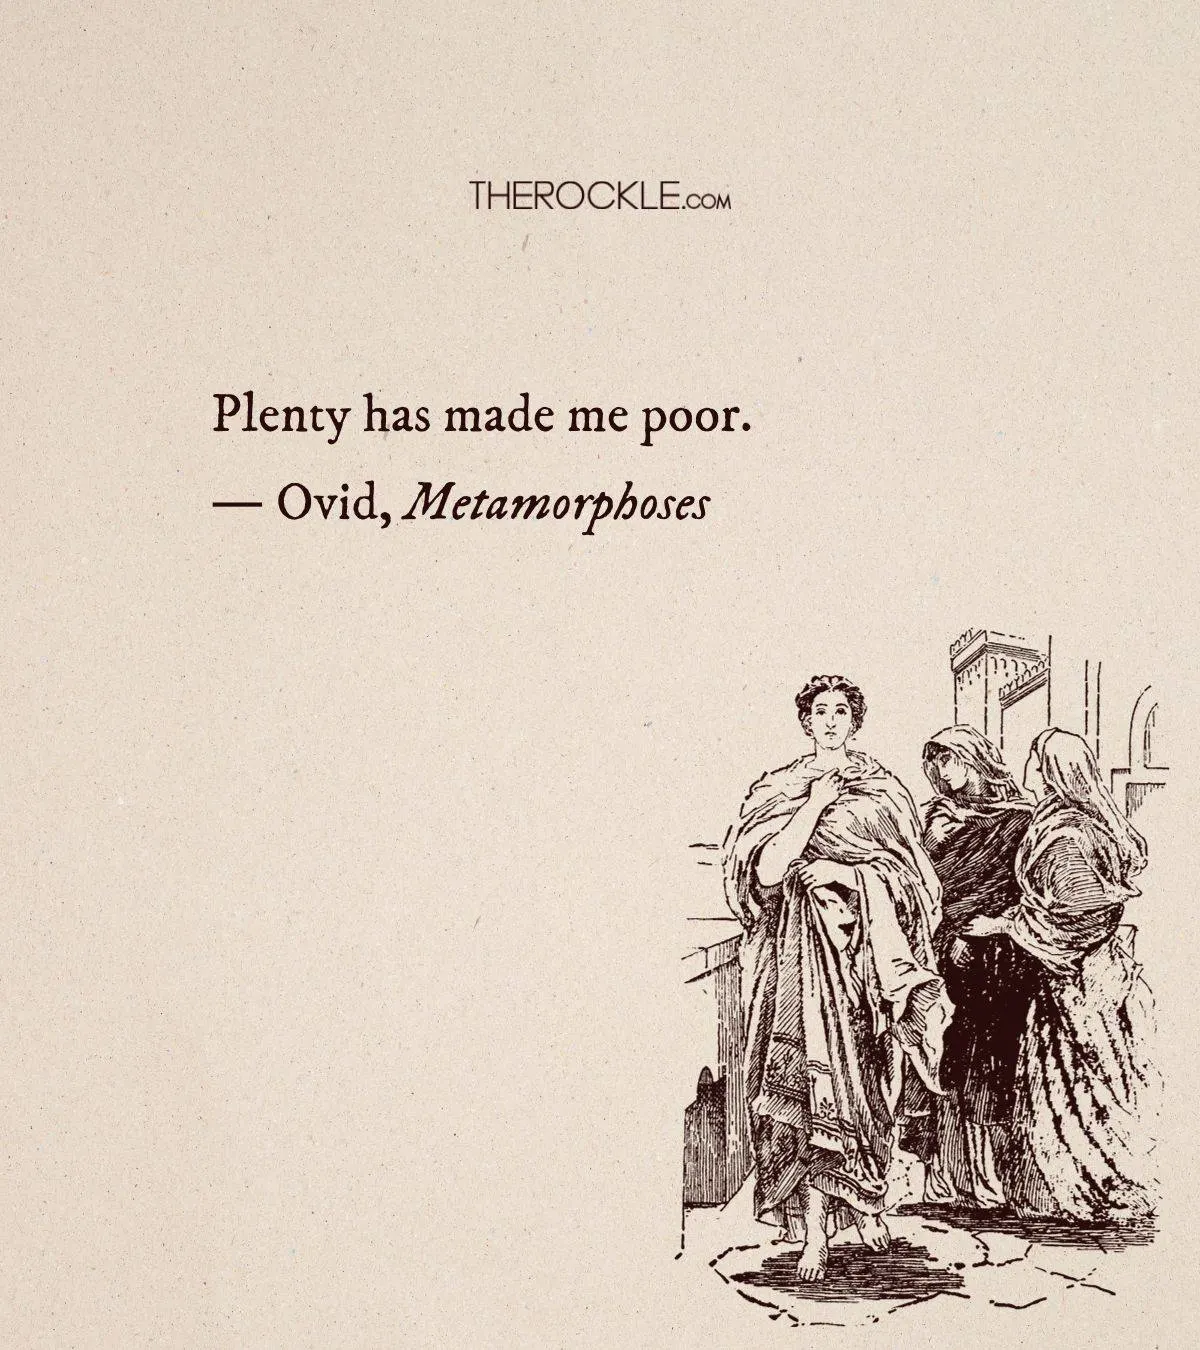 Ovid's quote about spiritual poverty from Metamorphoses